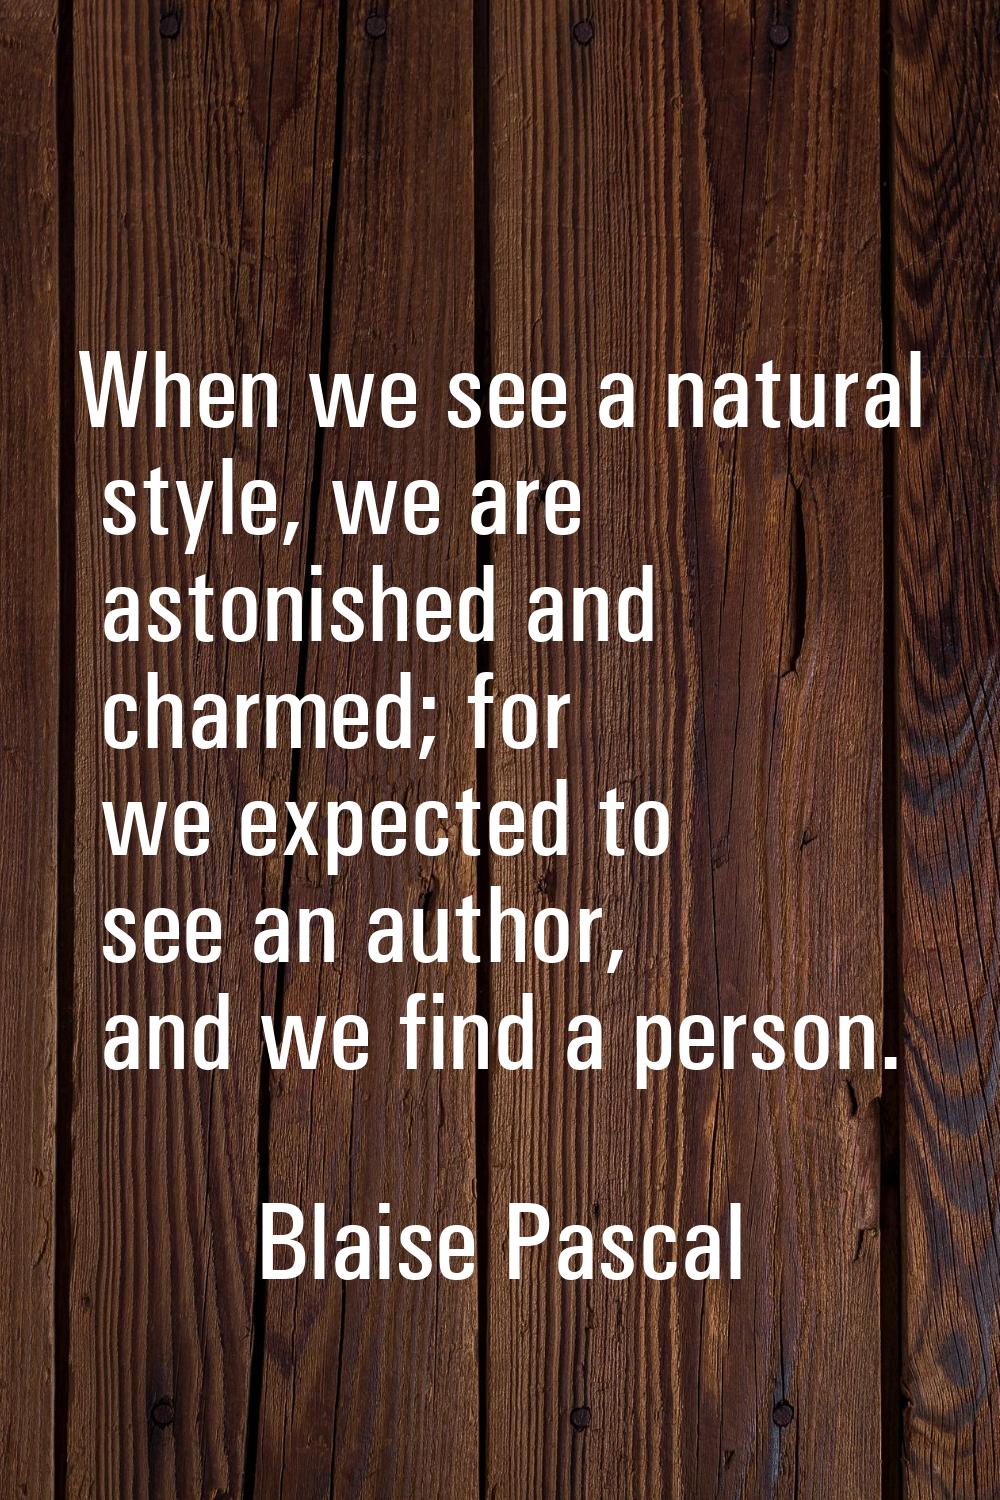 When we see a natural style, we are astonished and charmed; for we expected to see an author, and w